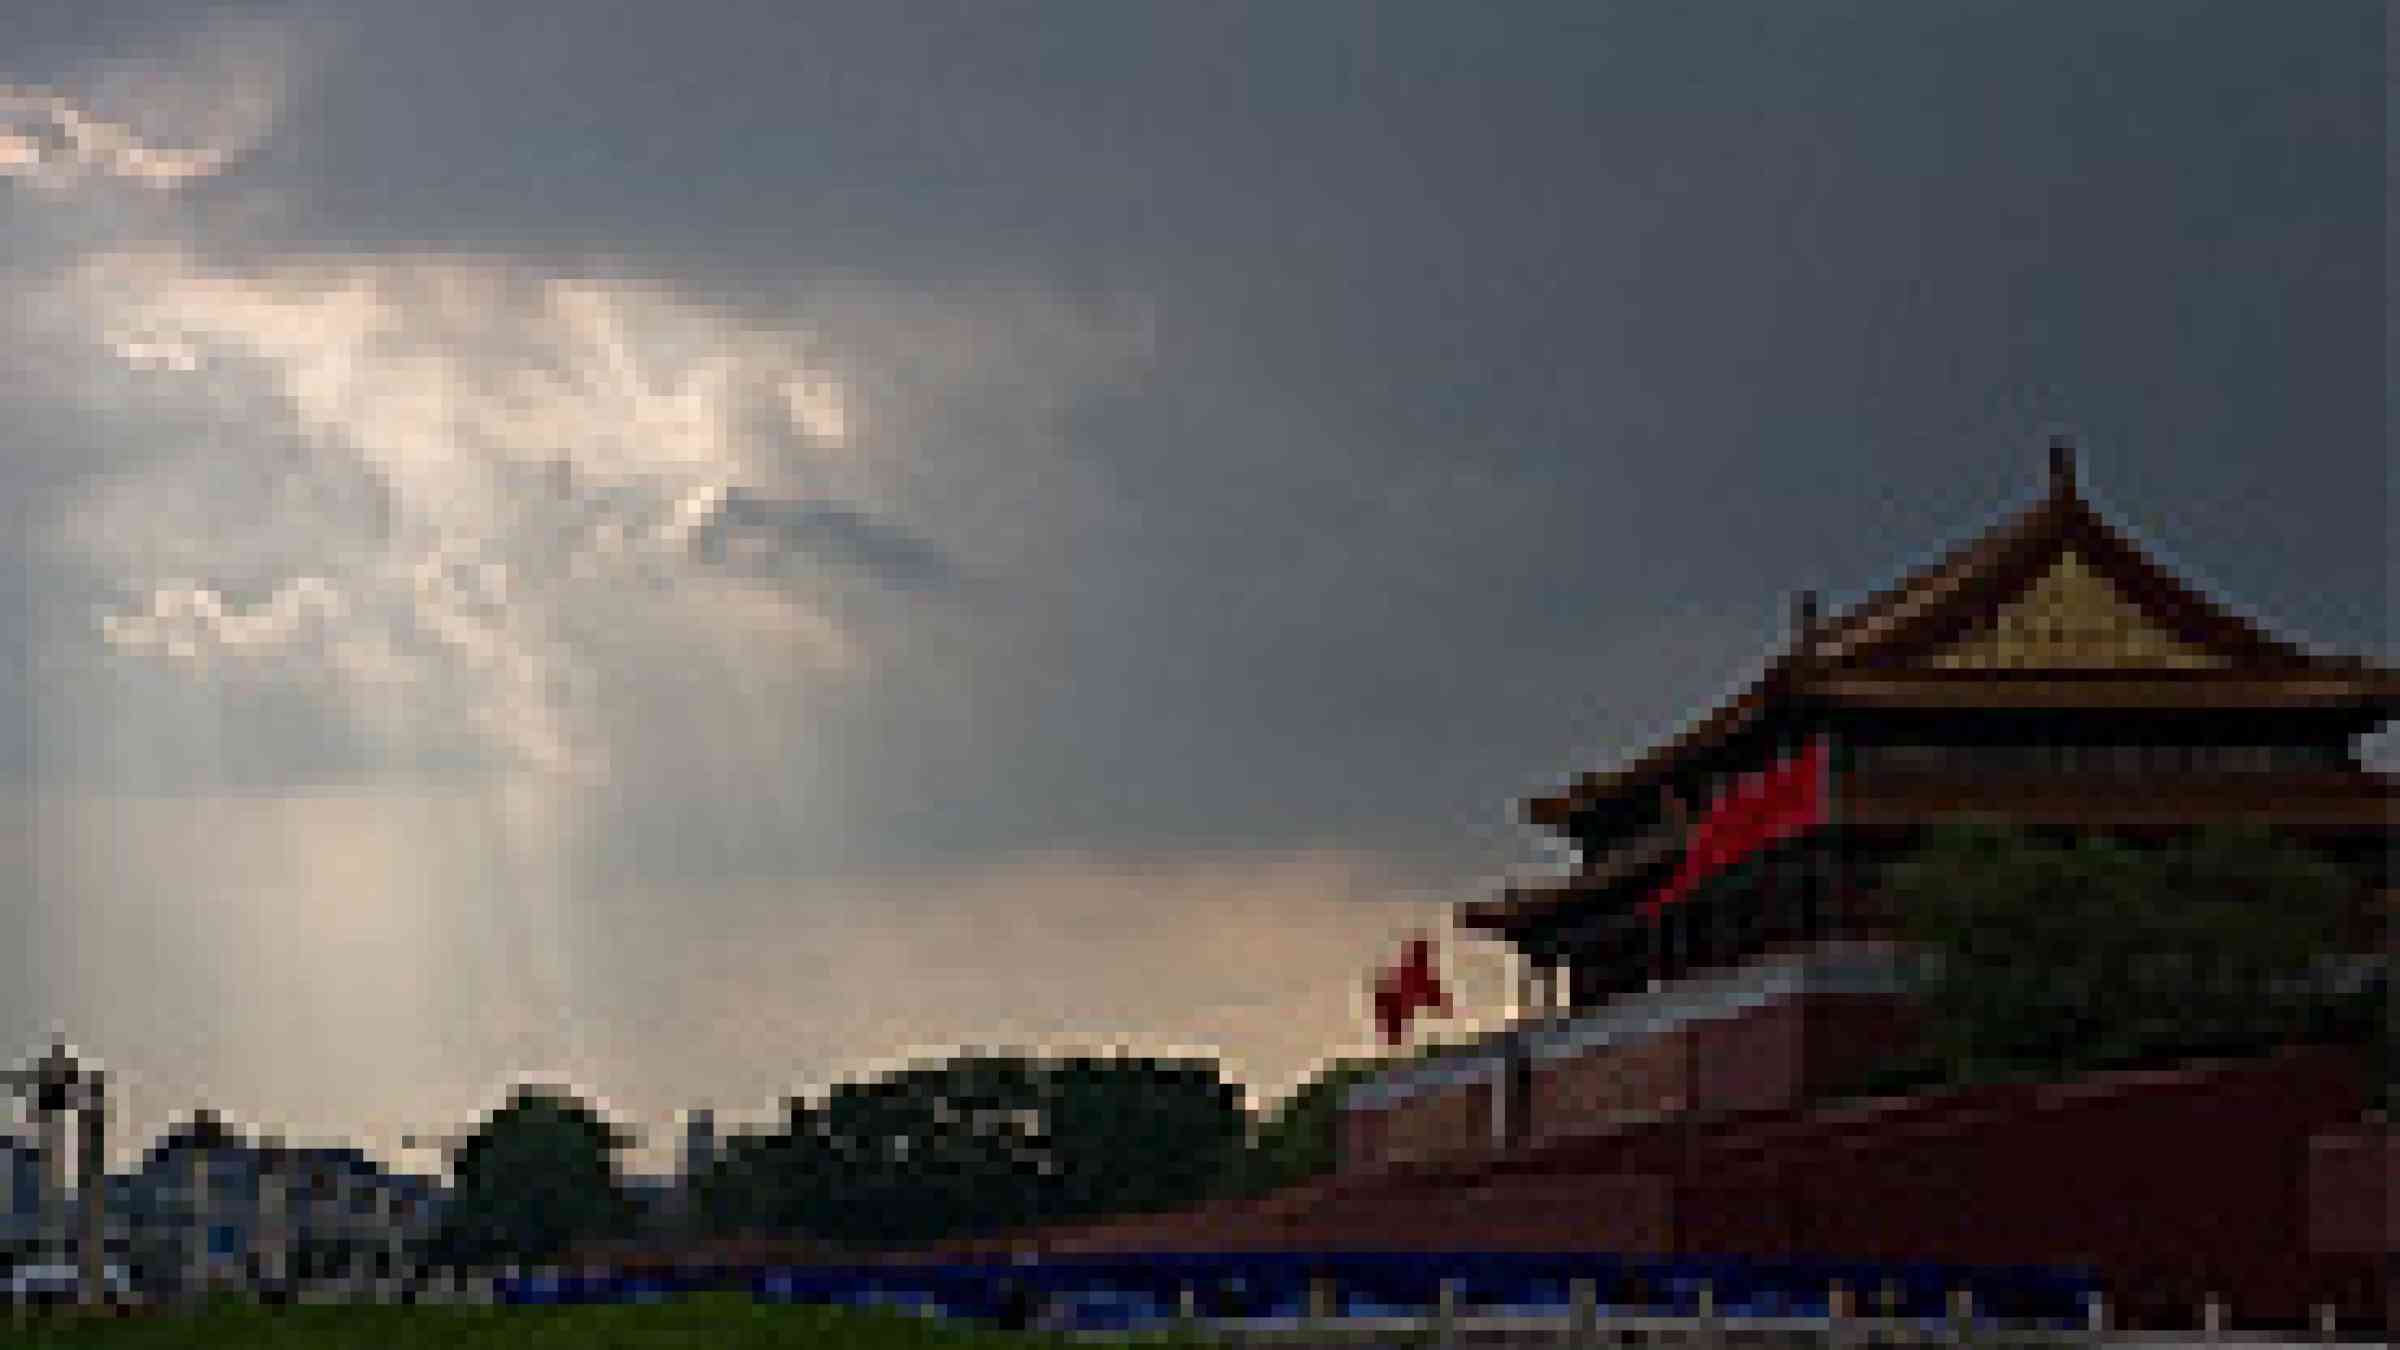 Photo of storm clouds over Tiananmen Gate, Beijing by Flickr user, Steve DeMent, Creative Commons Attribution-Noncommercial-No Derivative Works 2.0 Generic http://www.flickr.com/photos/sdement/2444288145/